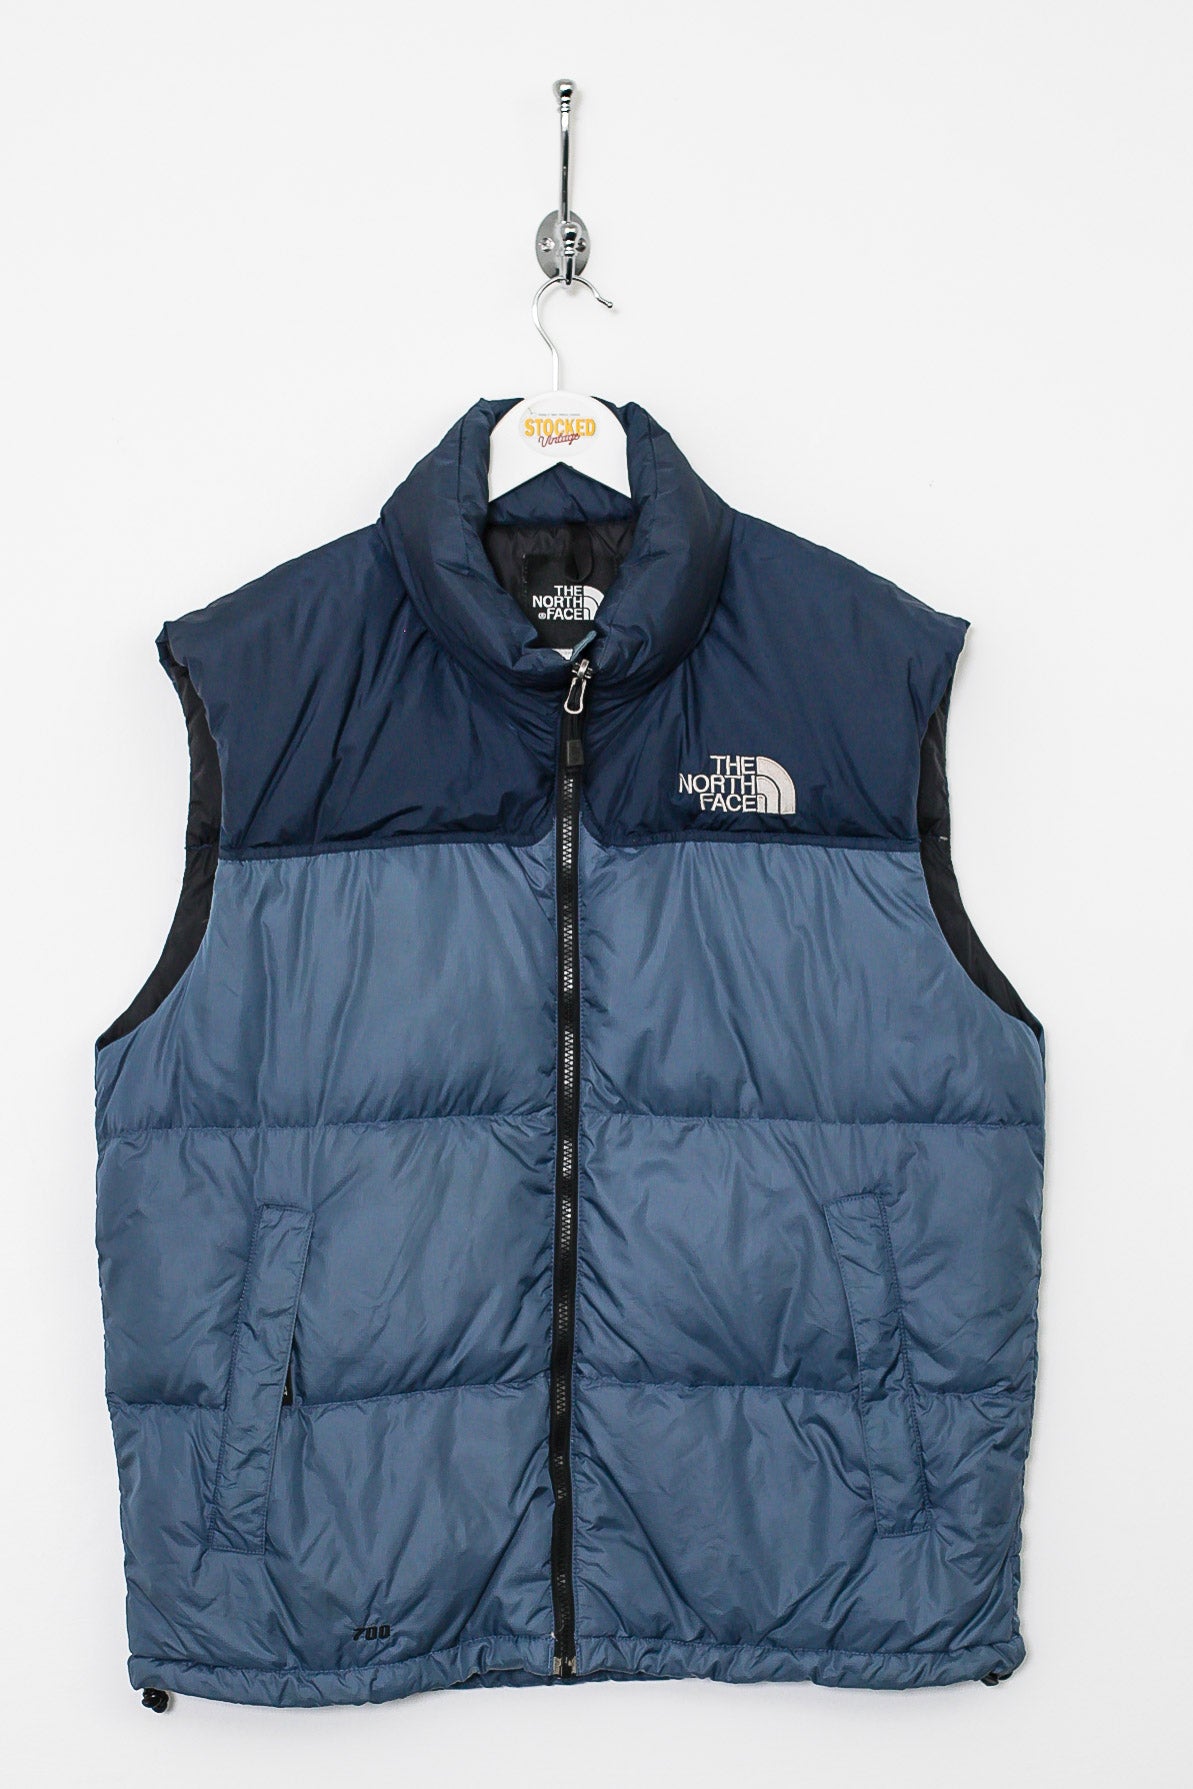 The North Face 700 Fill Gilet Puffer Jacket (L)